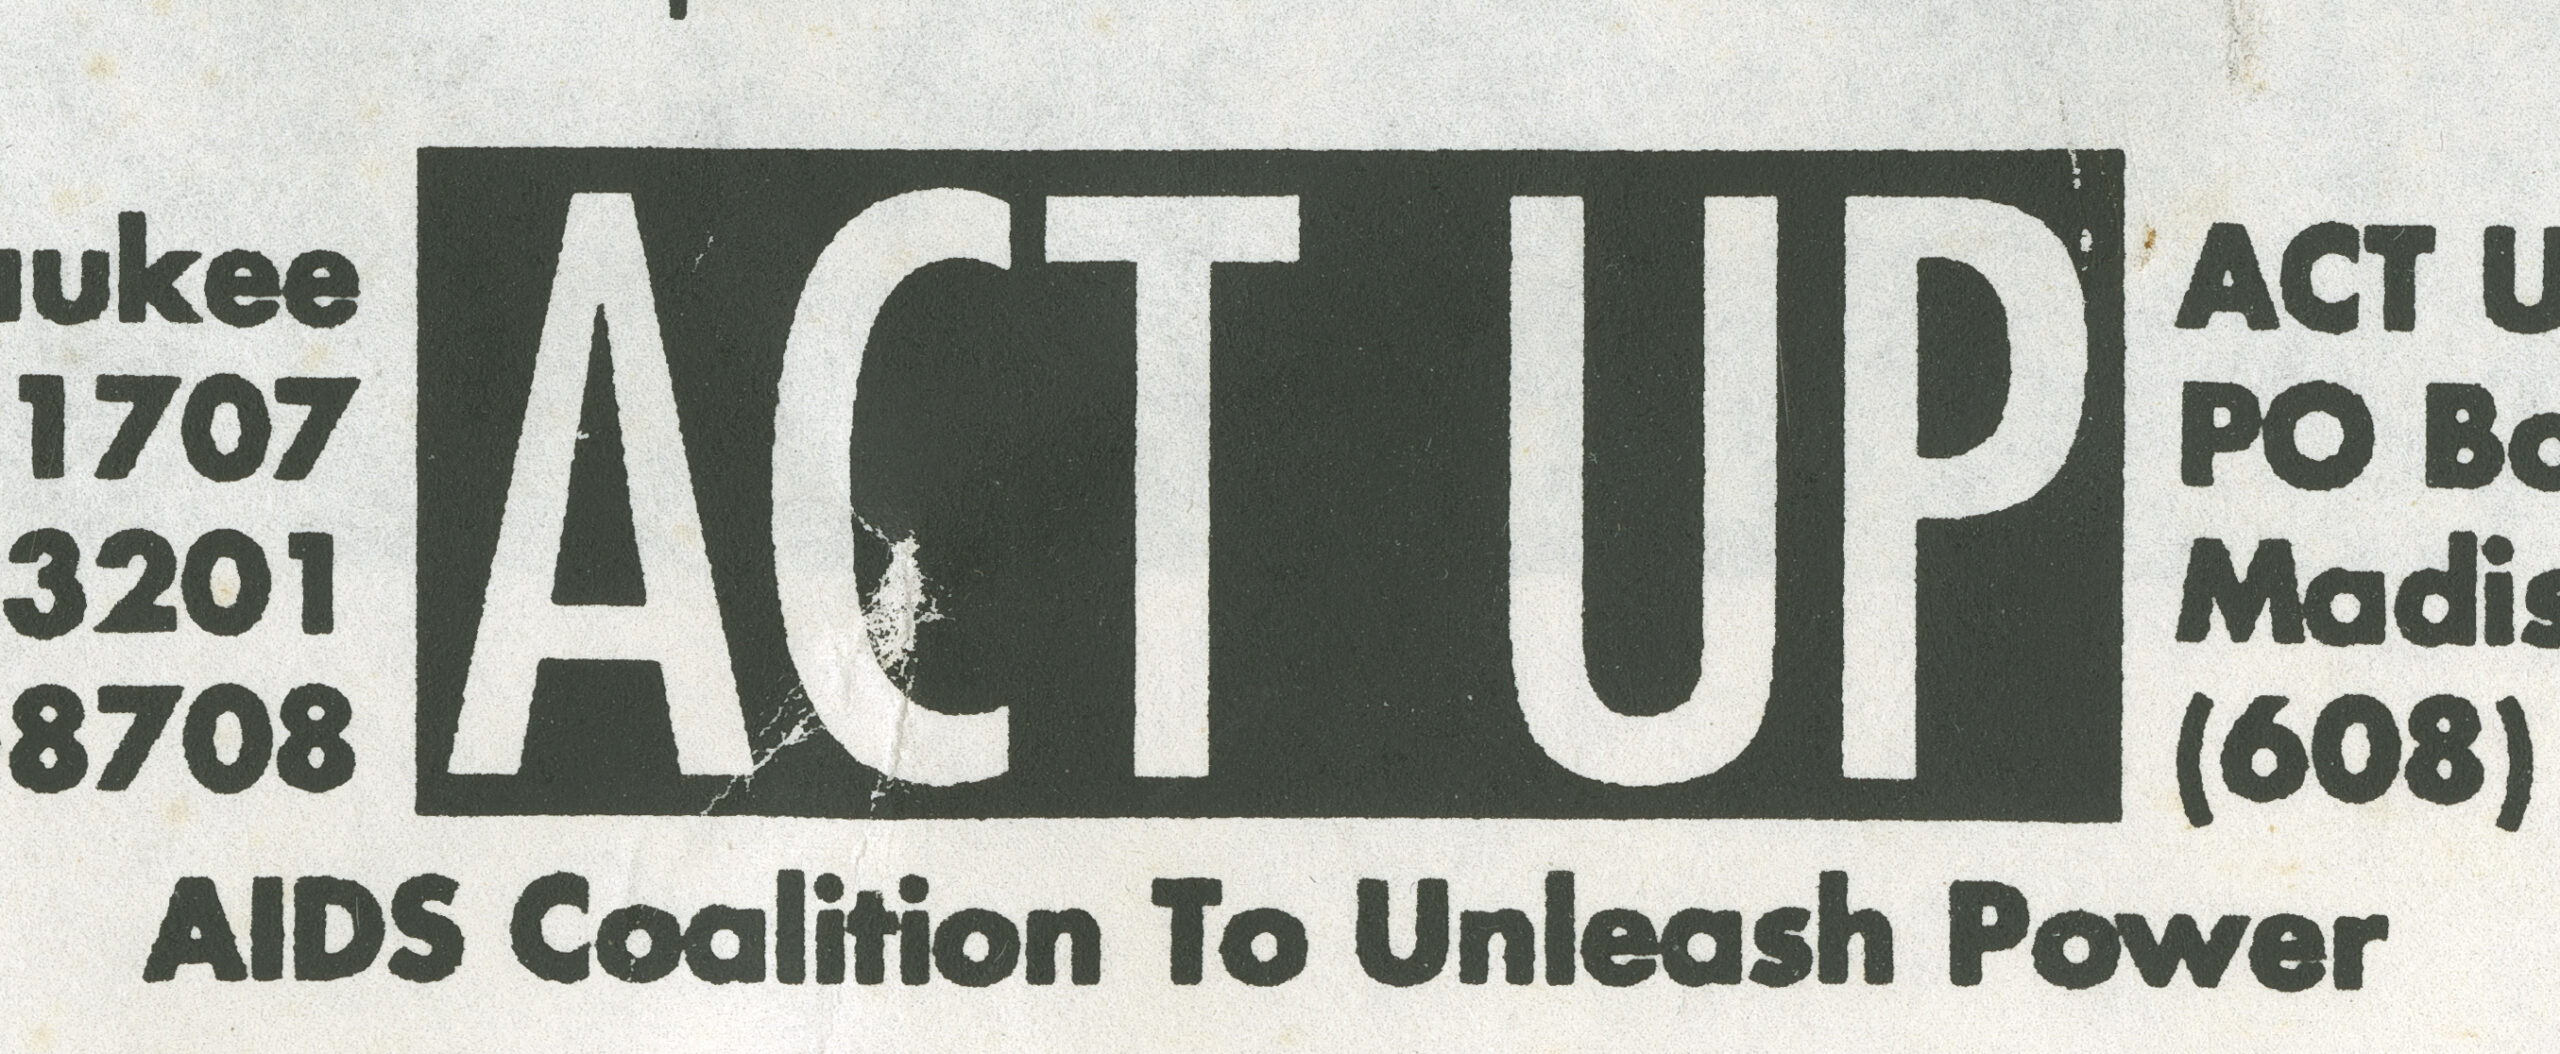 An image from a pamphlet that is part of the ACT UP Milwaukee archival collection